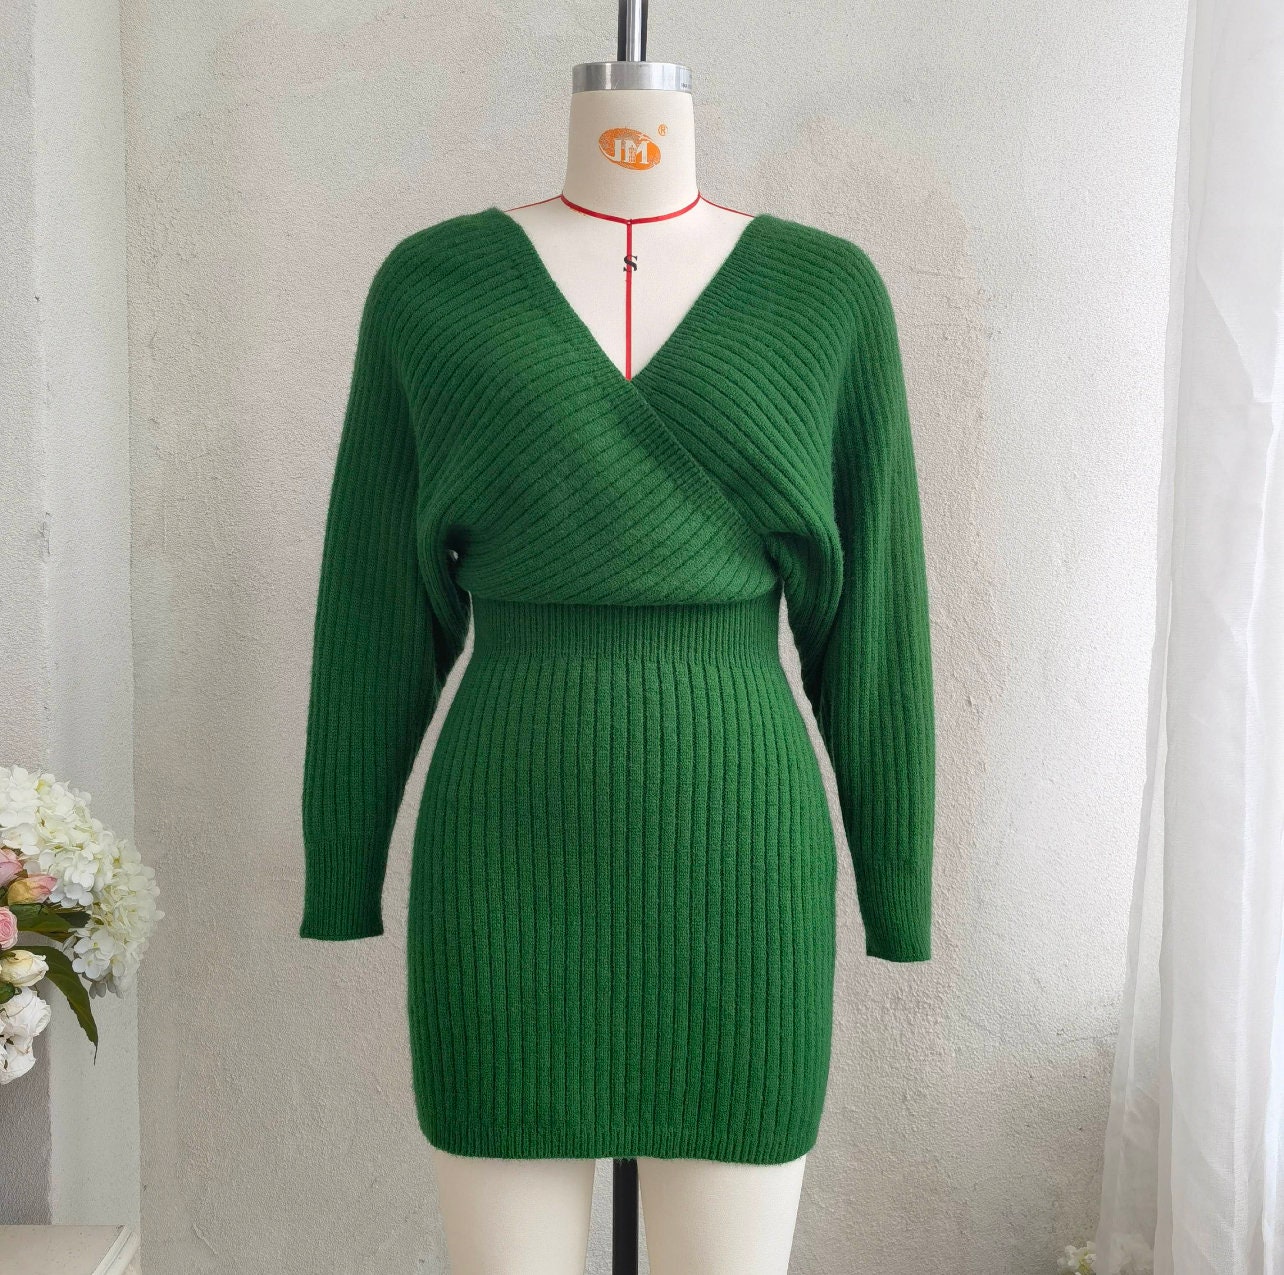 Buy Womens Sweater Dress Online In India -  India